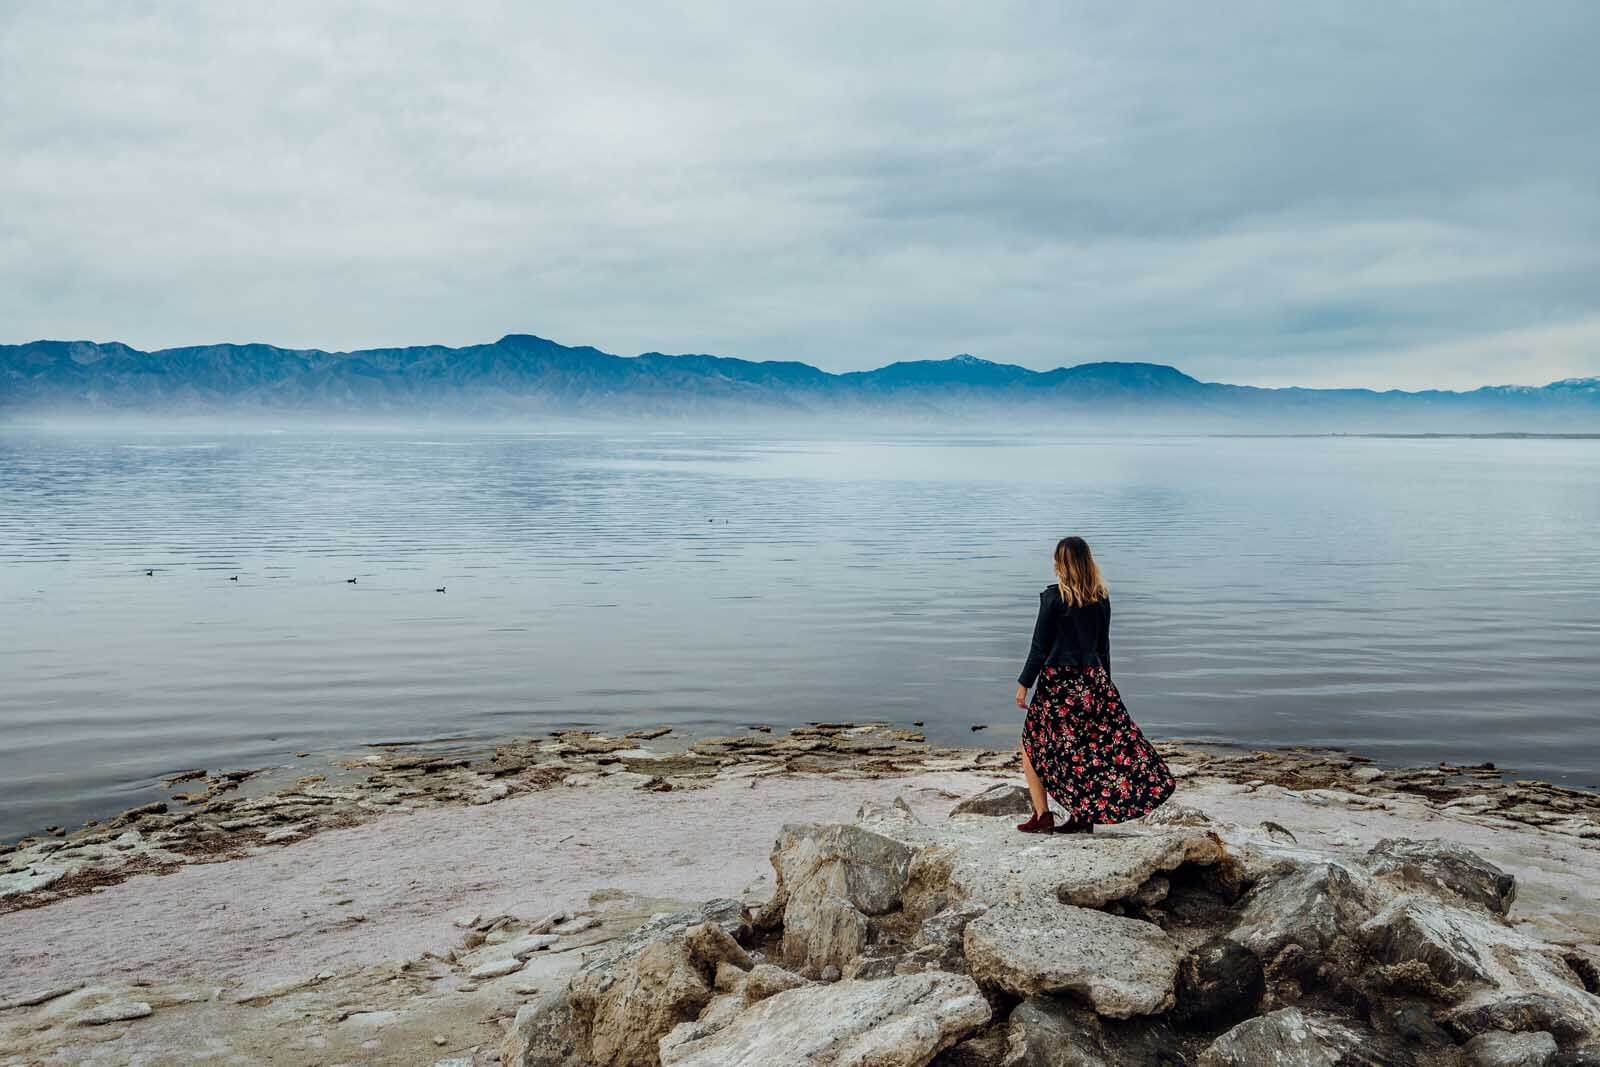 Megan standing on top of rocks looking at the dying Salton Sea in California